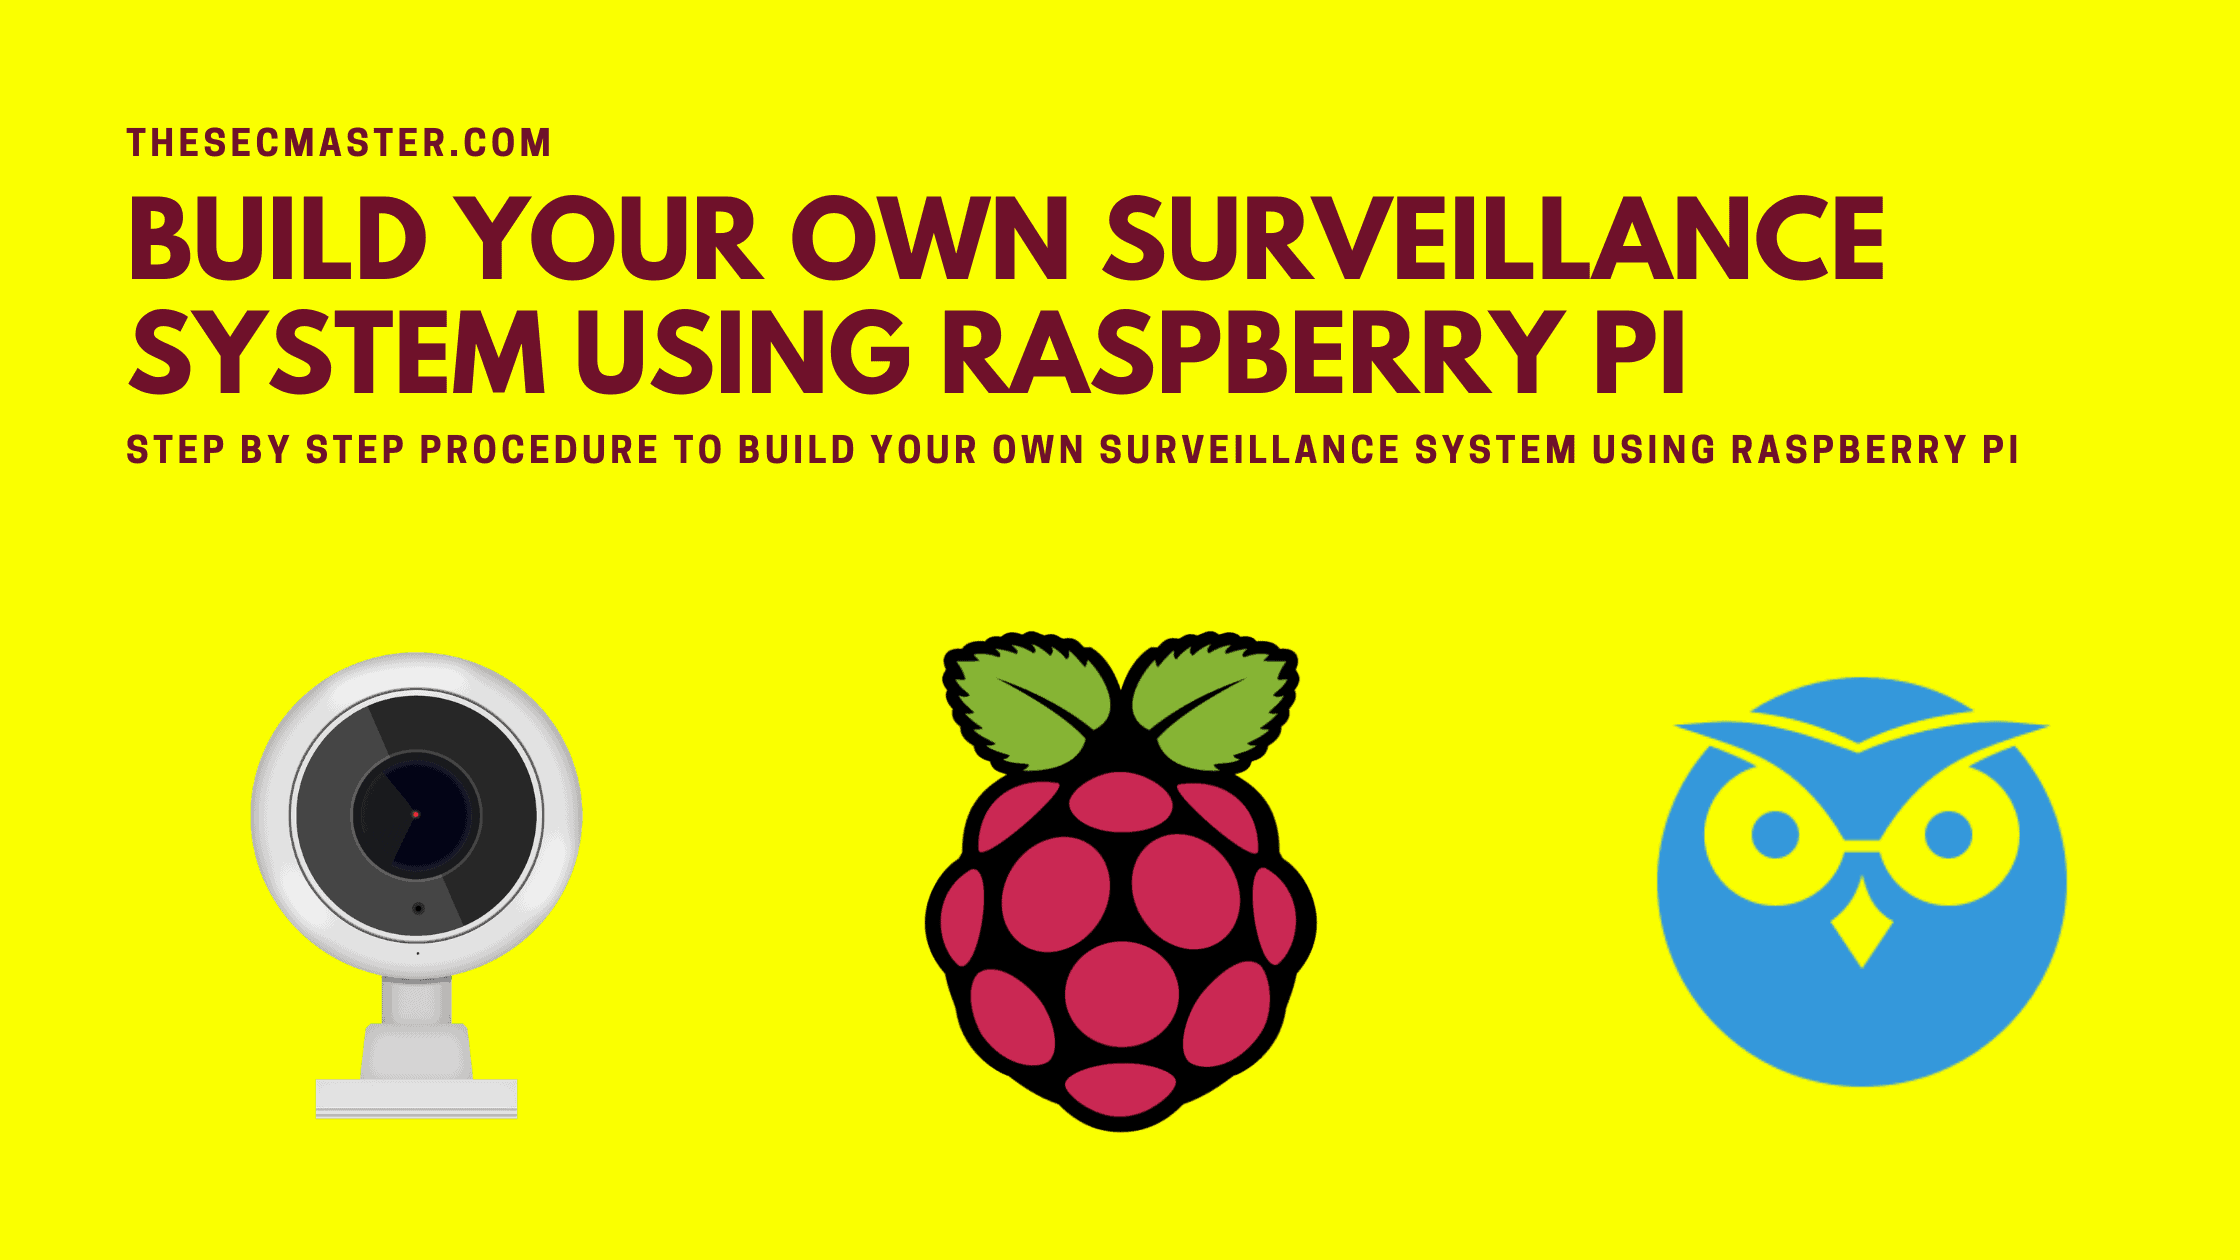 Step By Step Procedure To Build Your Own Surveillance System Using Raspberry Pi